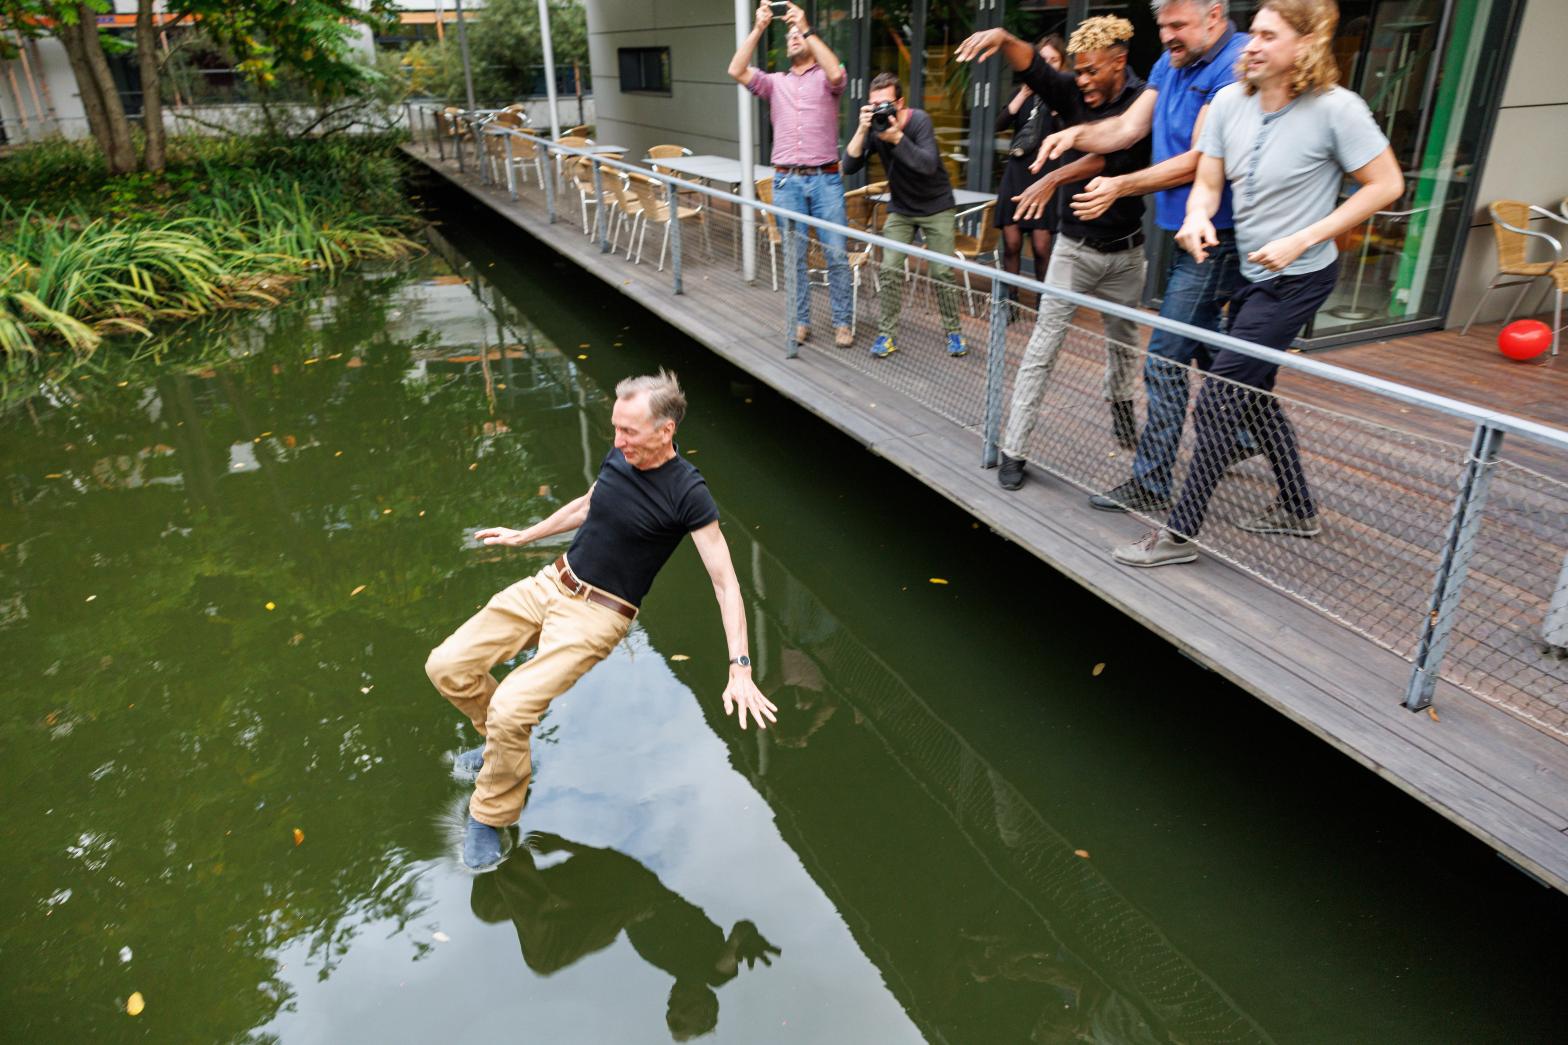 Nobel Laureate Svante Pääbo was thrown into a pool of water today for his accomplishment. (Photo: Jens Schlueter/Getty Images, Getty Images)